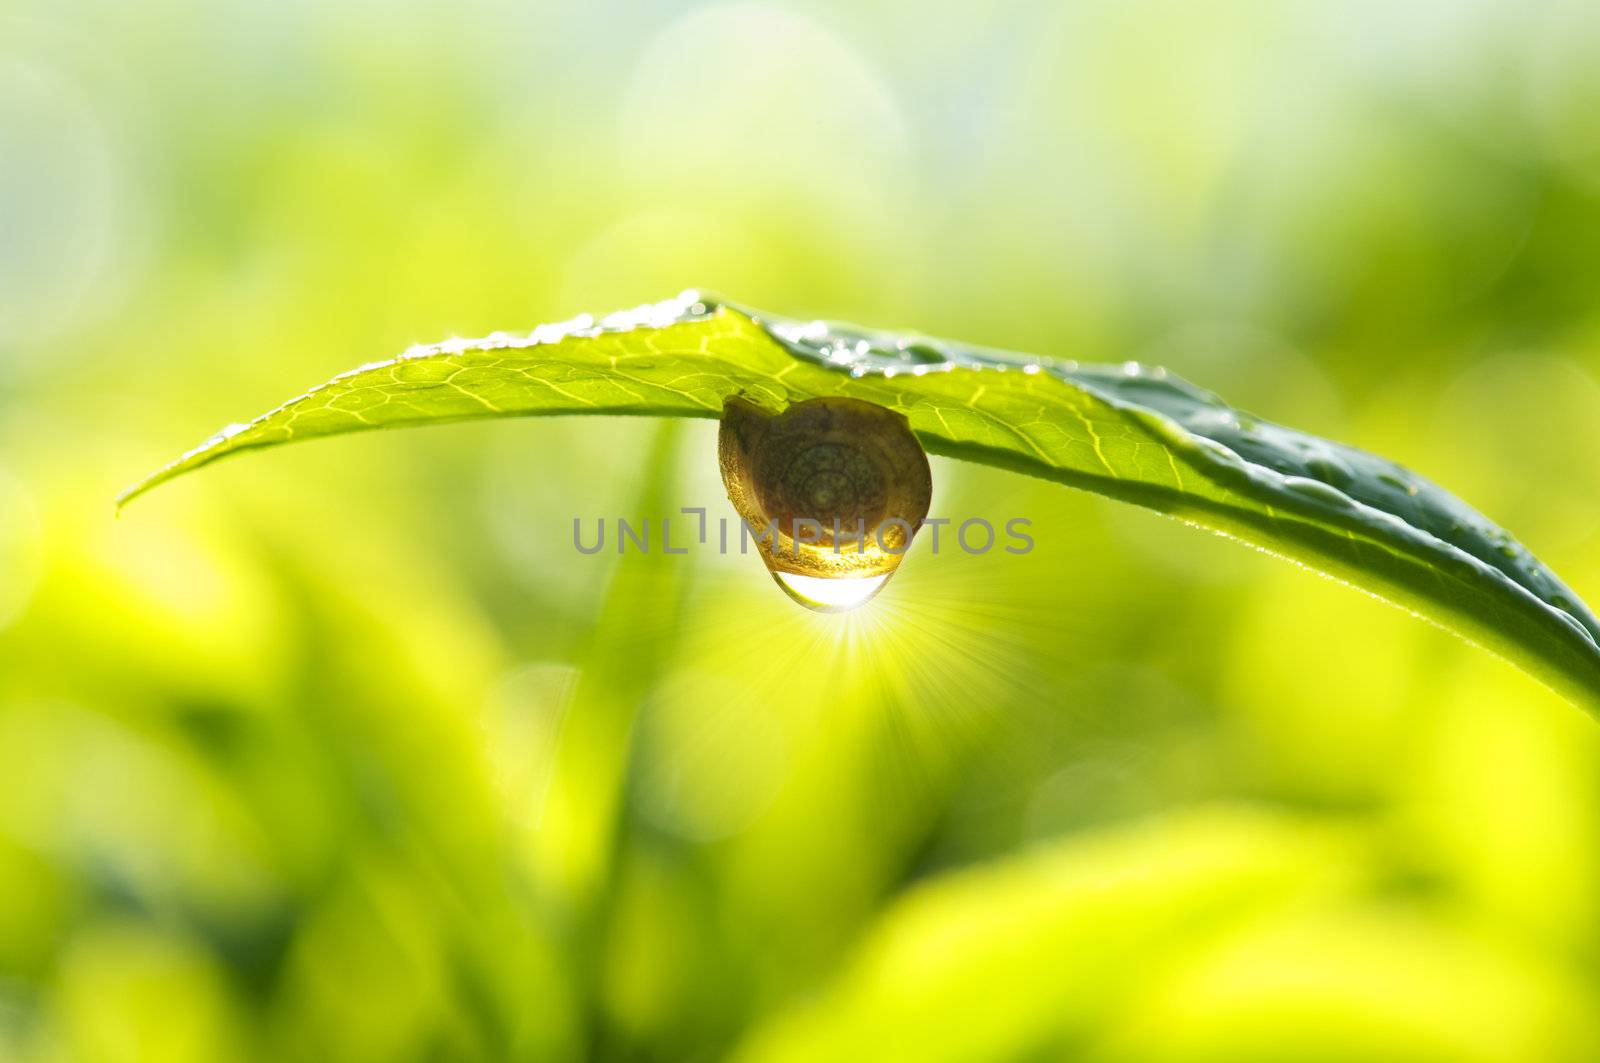 Snail on tea leaf with morning sunlight reflect on dew.